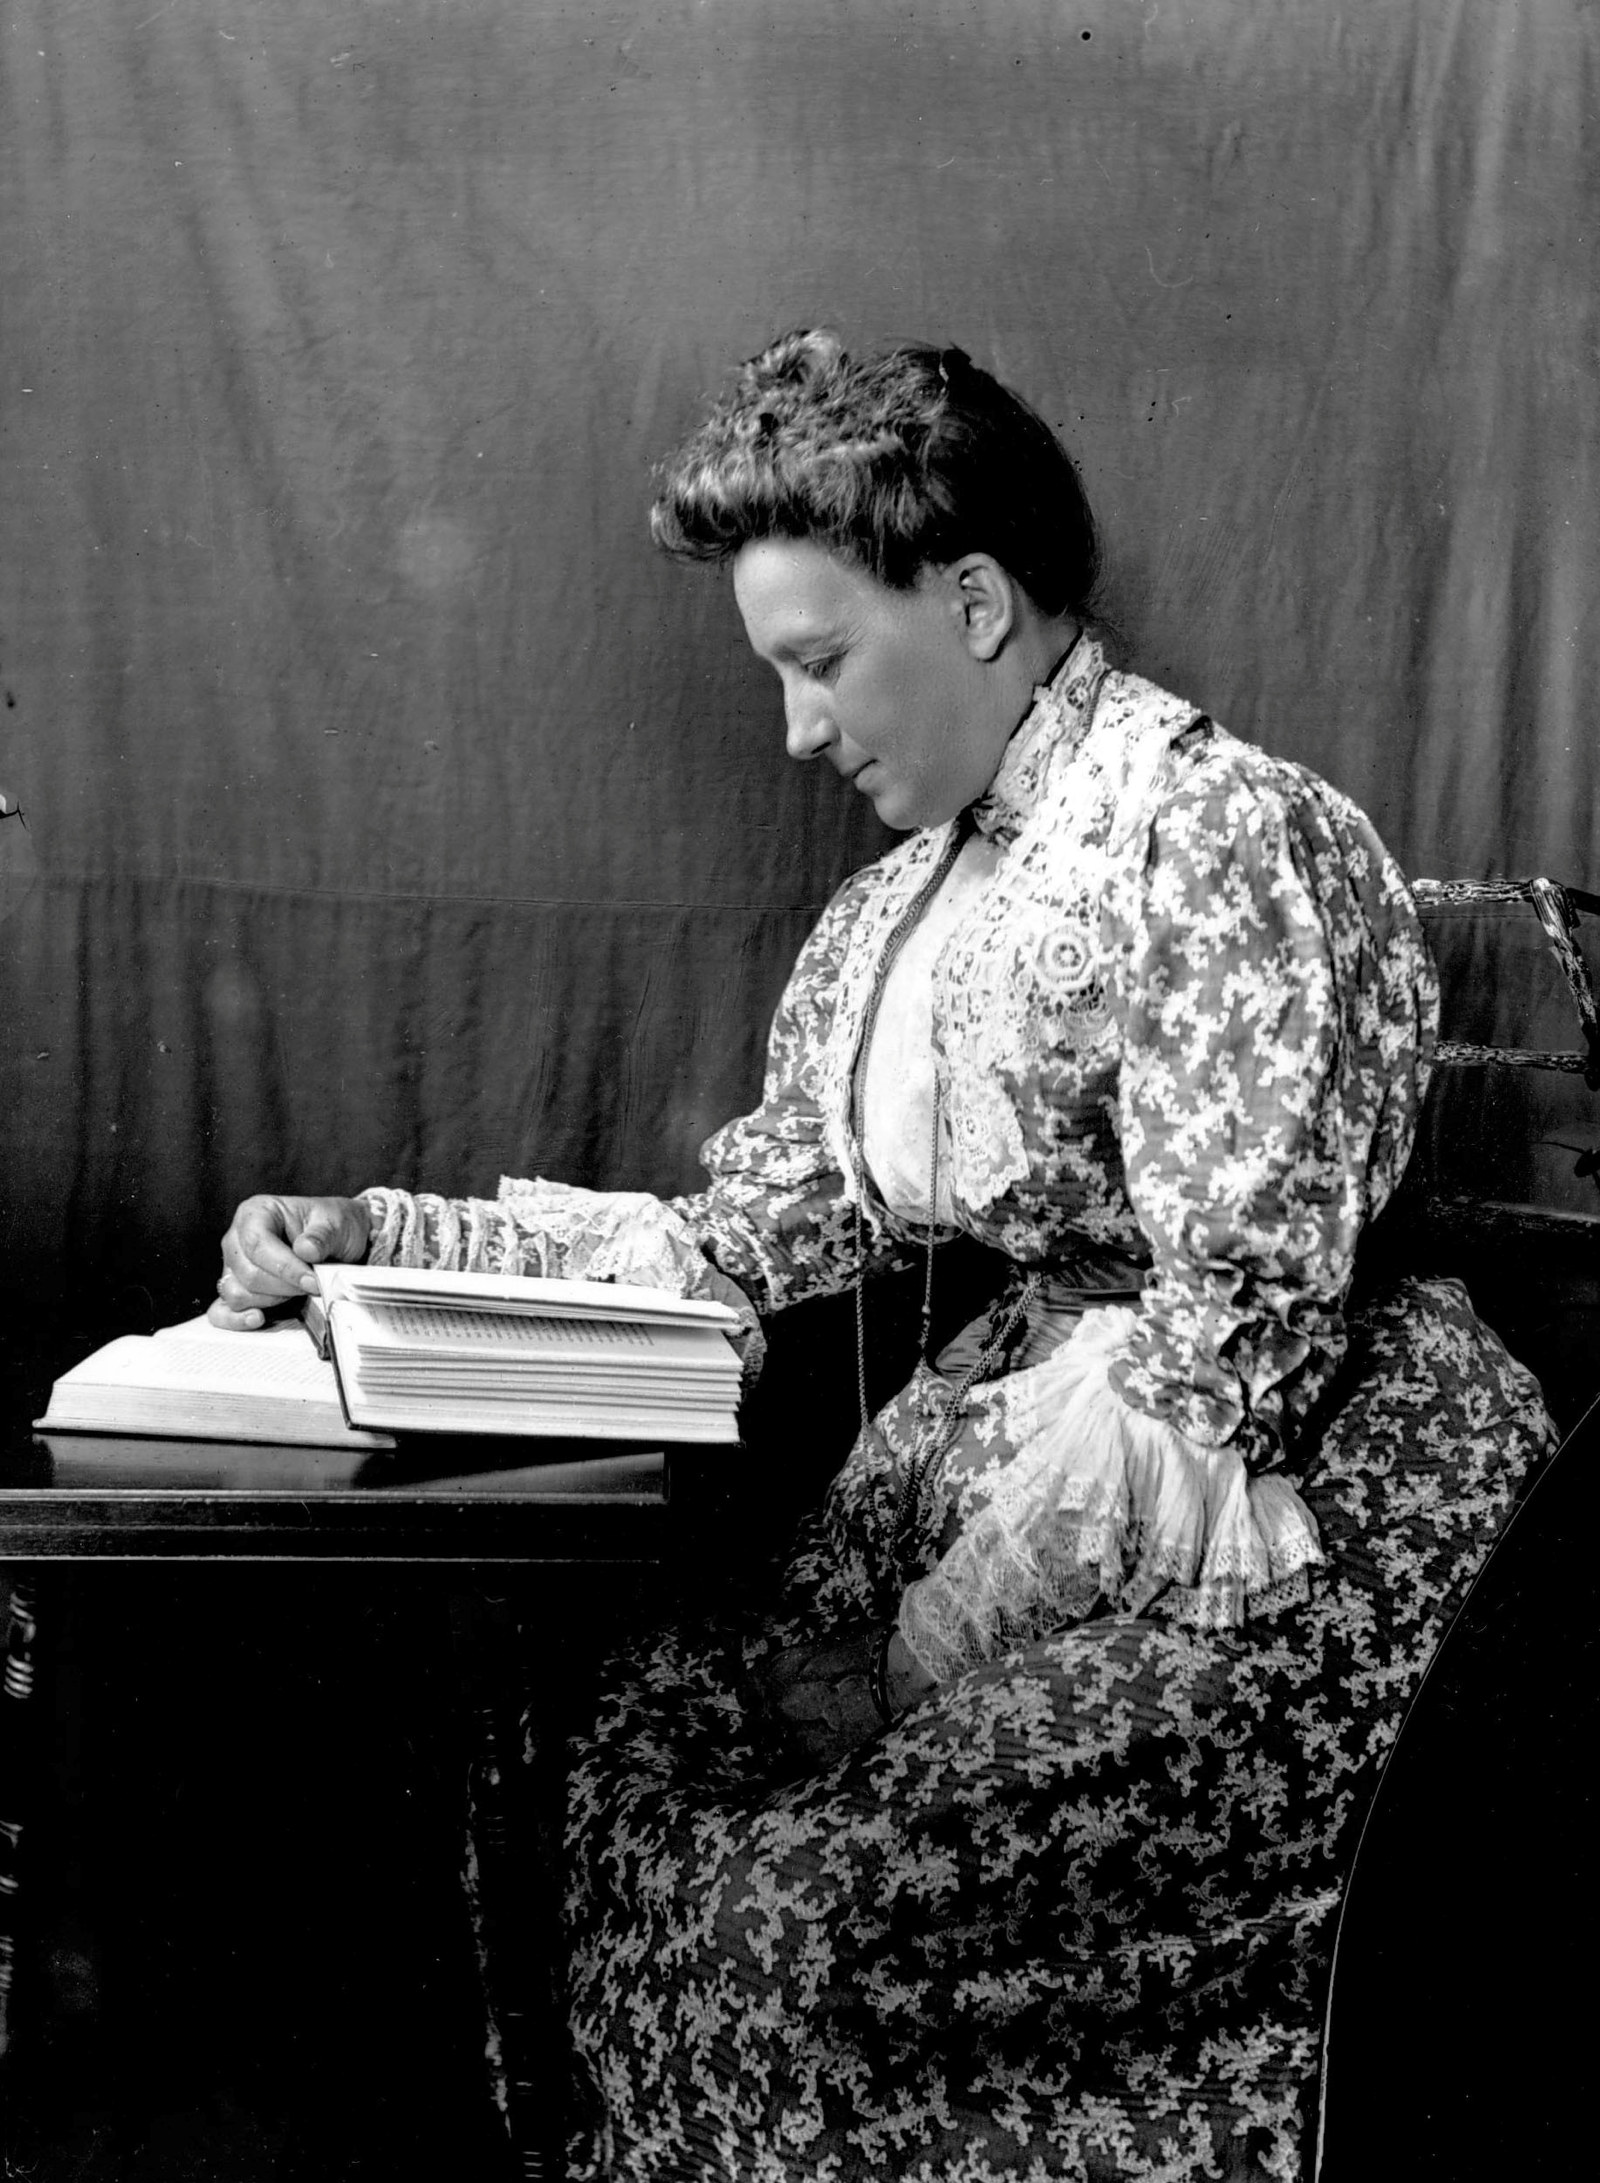 Photo of woman sitting at a desk reading, wearing a patterned high collar dress, facing the camera sideways